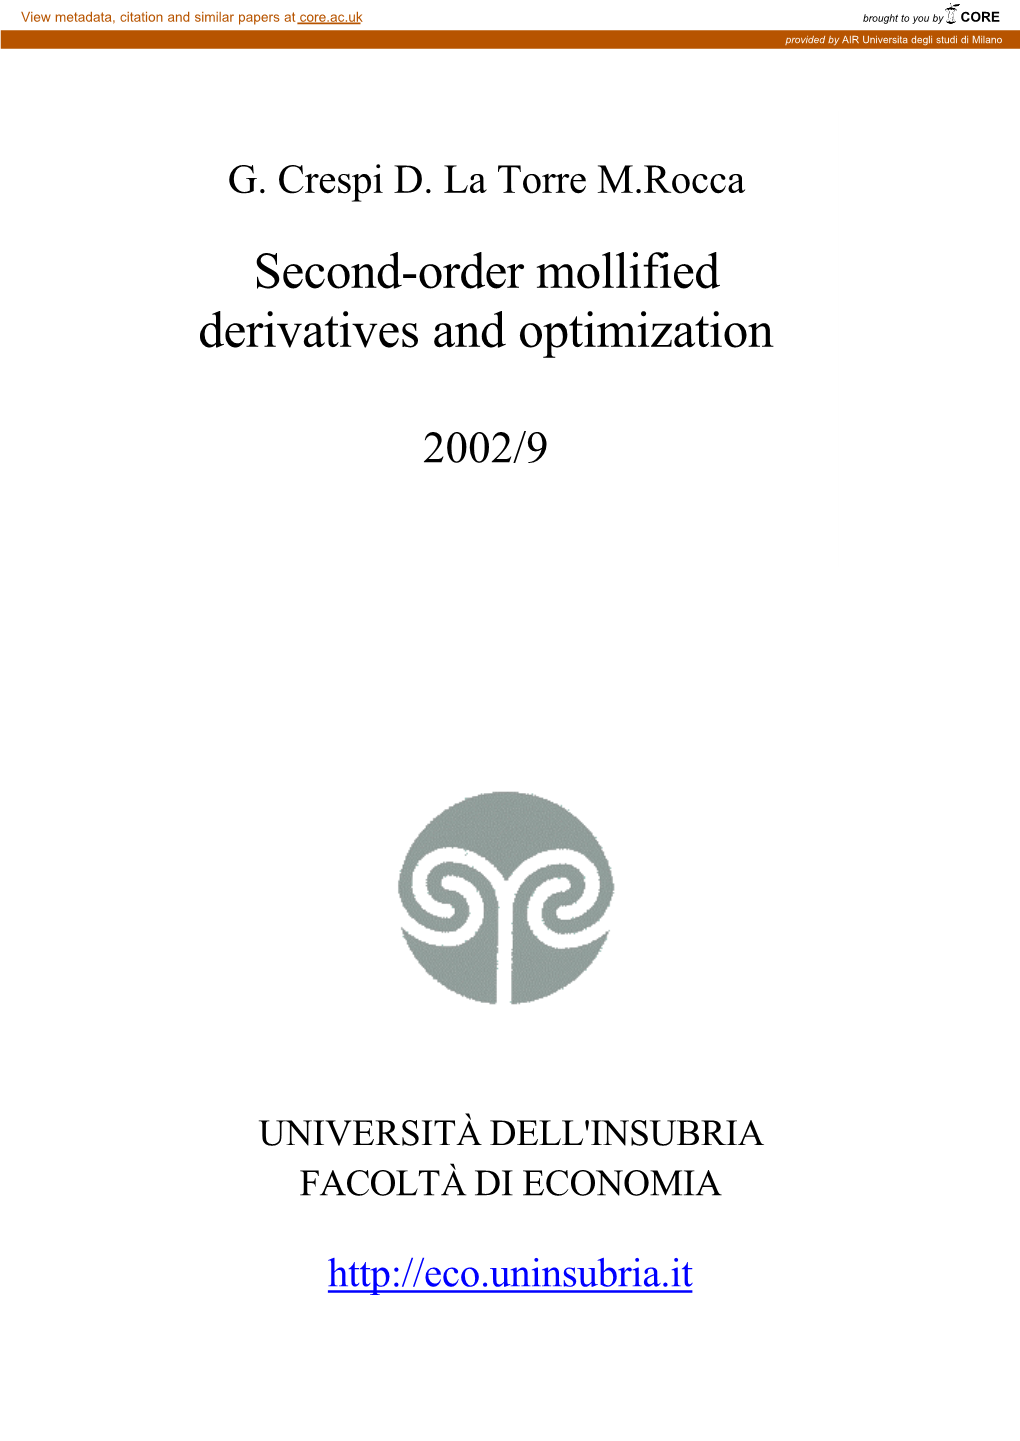 Second-Order Mollified Derivatives and Optimization